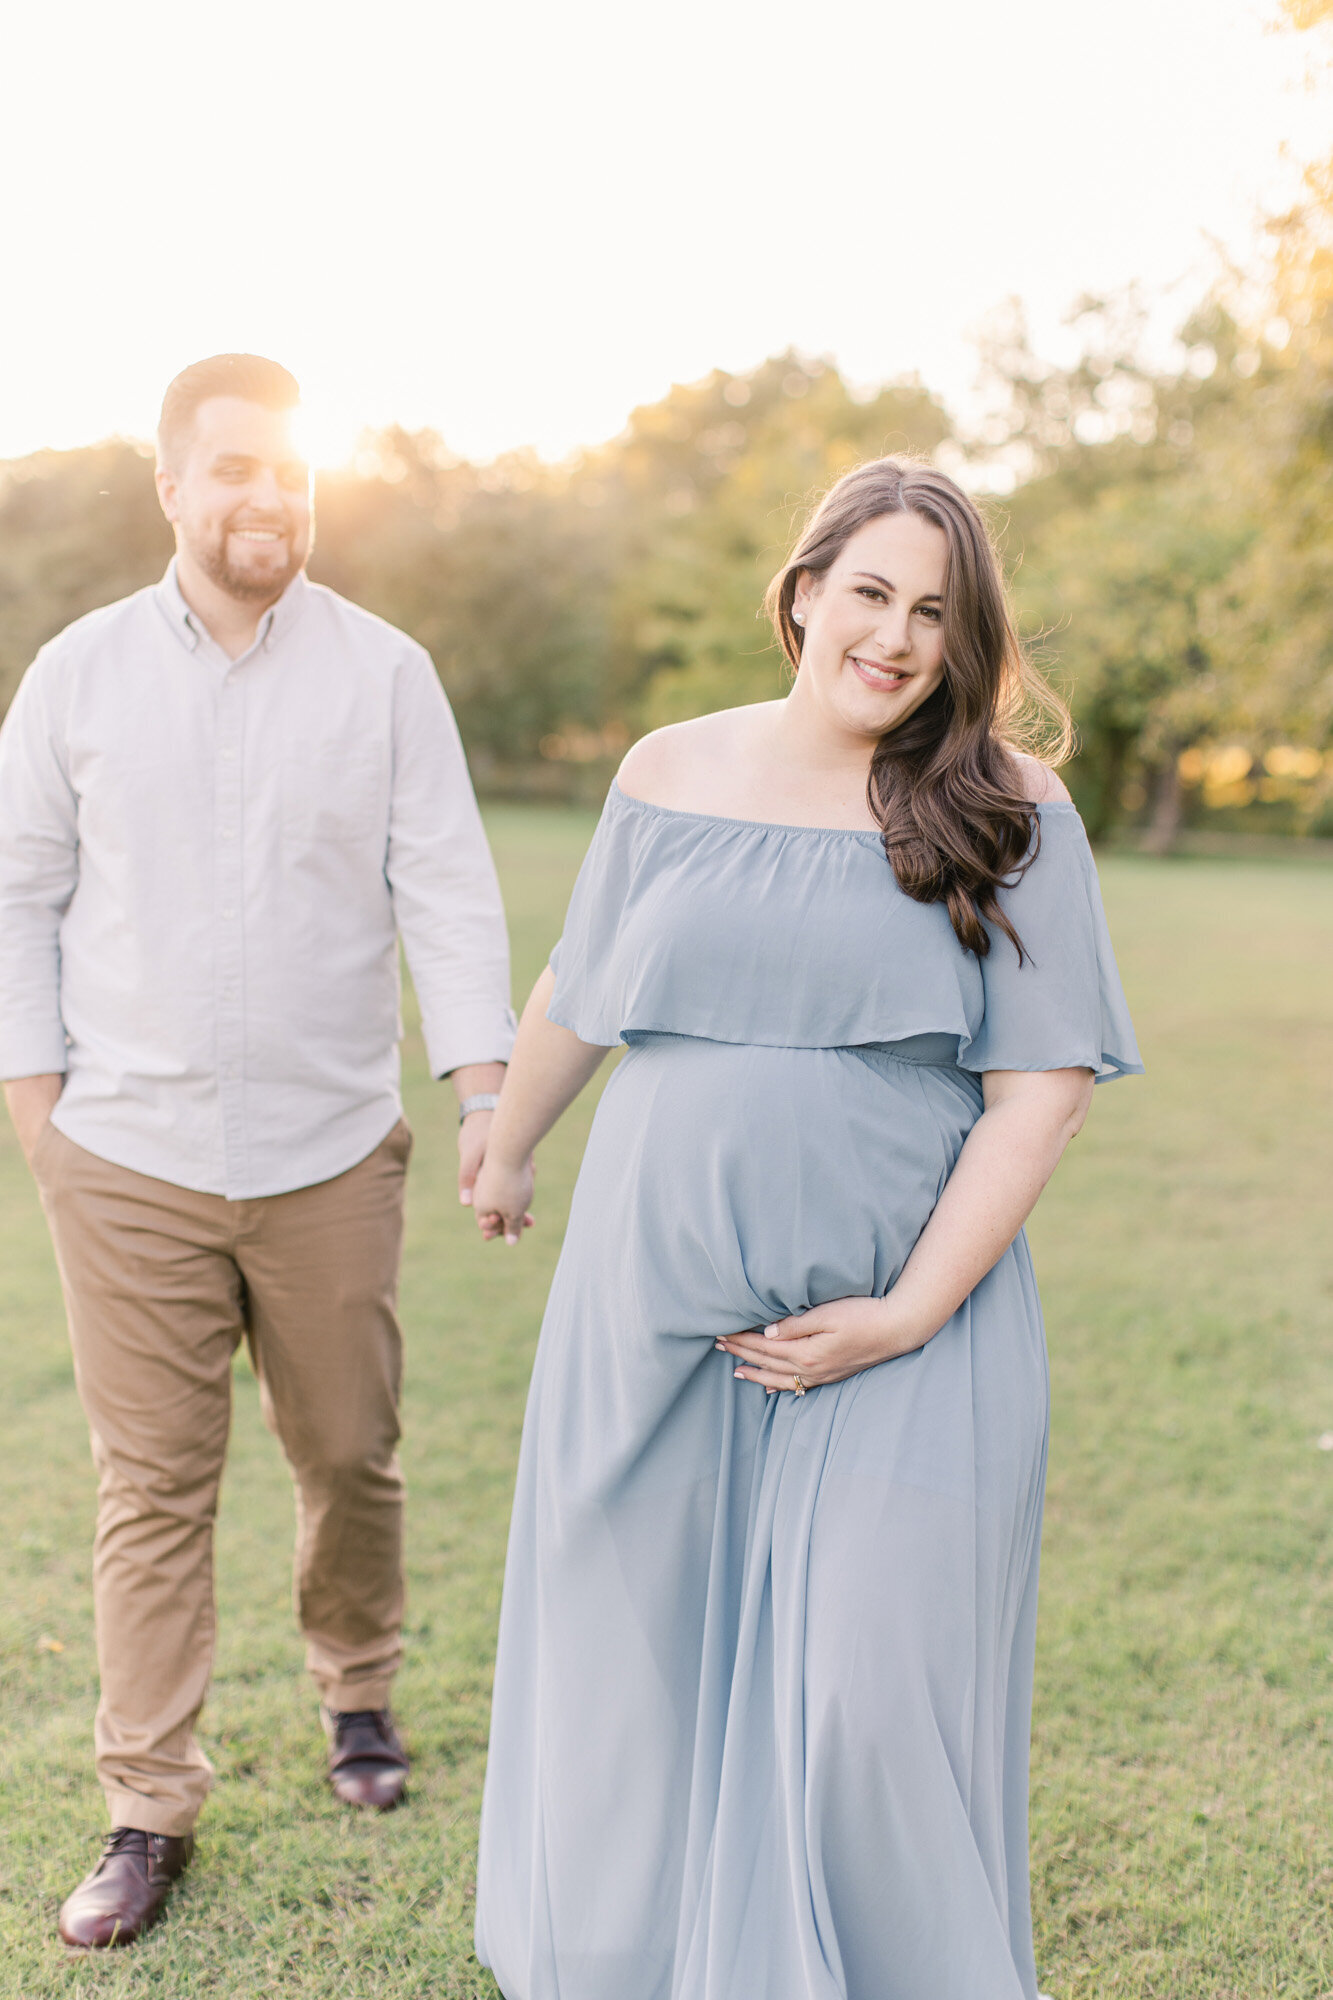 Outdoor maternity photos in Rogers AR